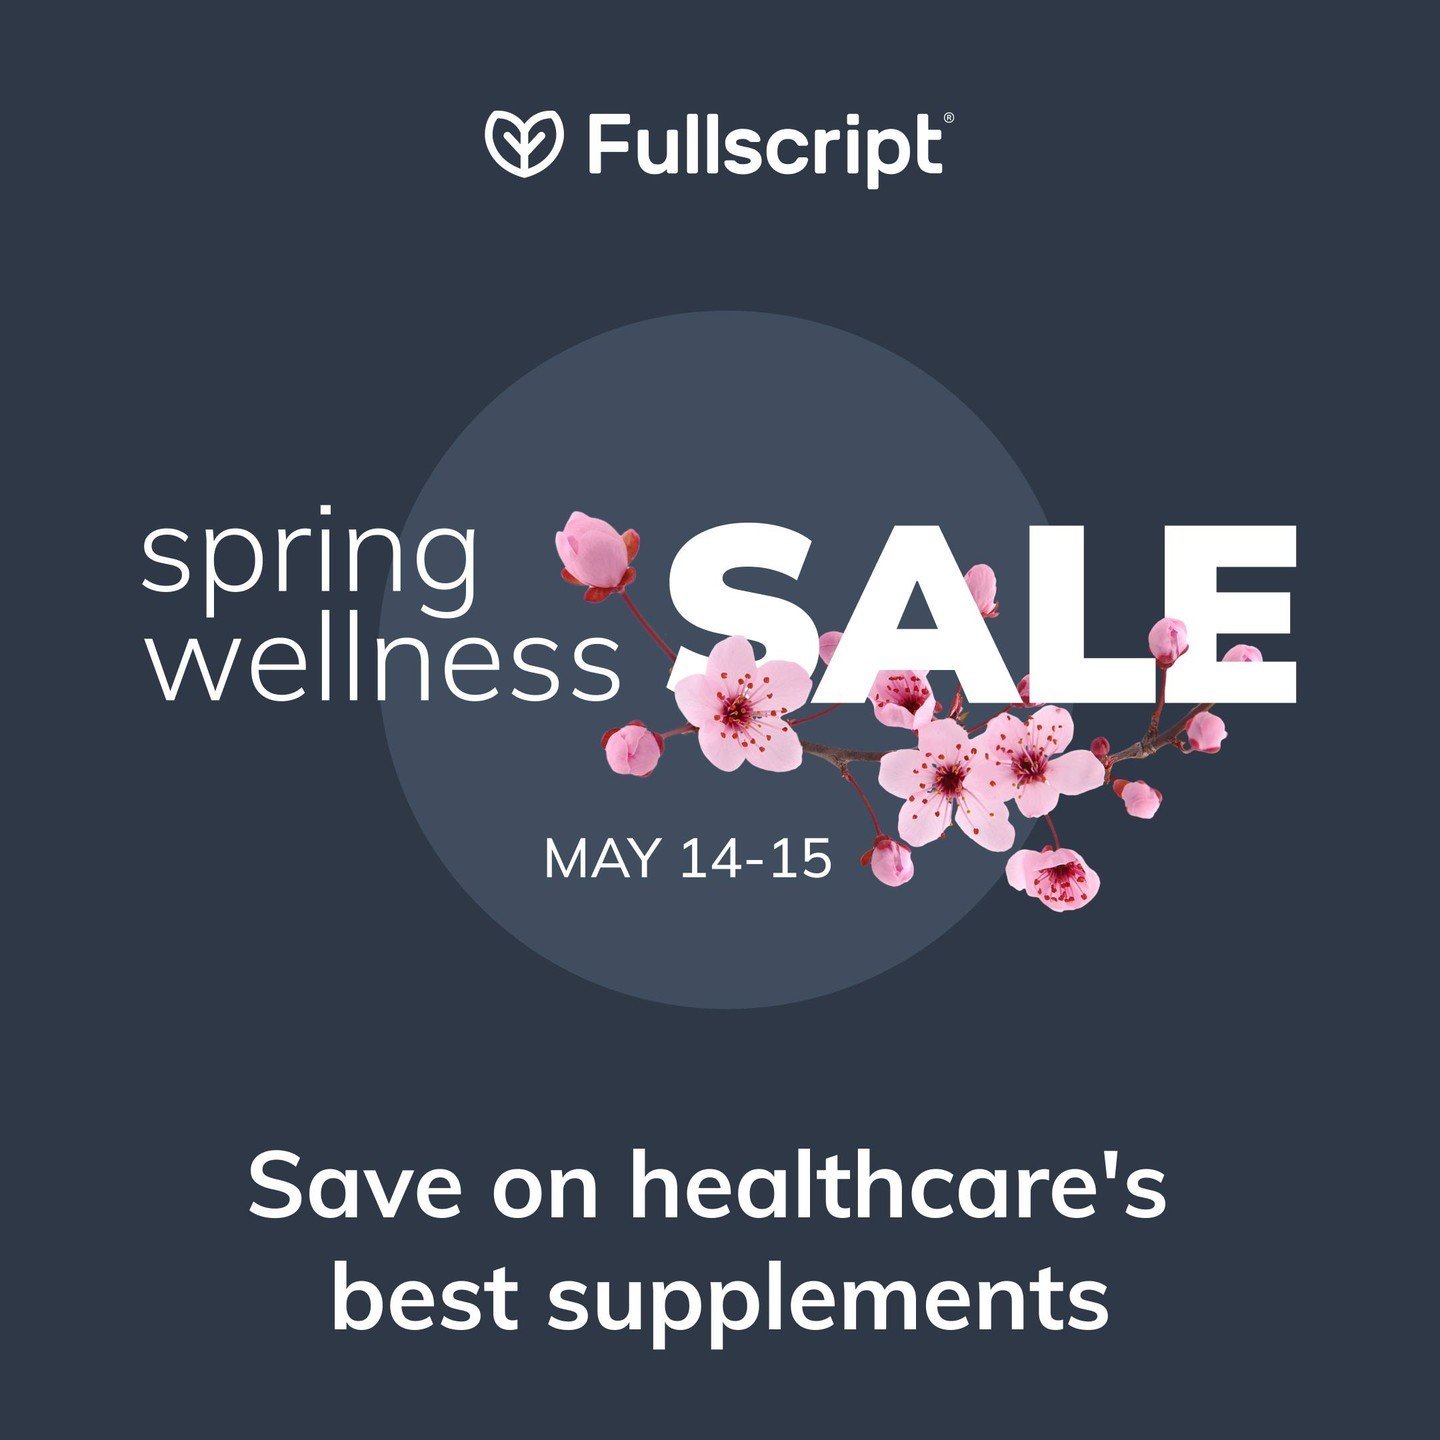 Savings alert! Starting today for two days, you can save an added 10% on all supplements in our Fullscript dispensary! ⁠
⁠
In addition to high quality, practitioner grade supplements, Fullscript carries all your favorite natural products for oral hea